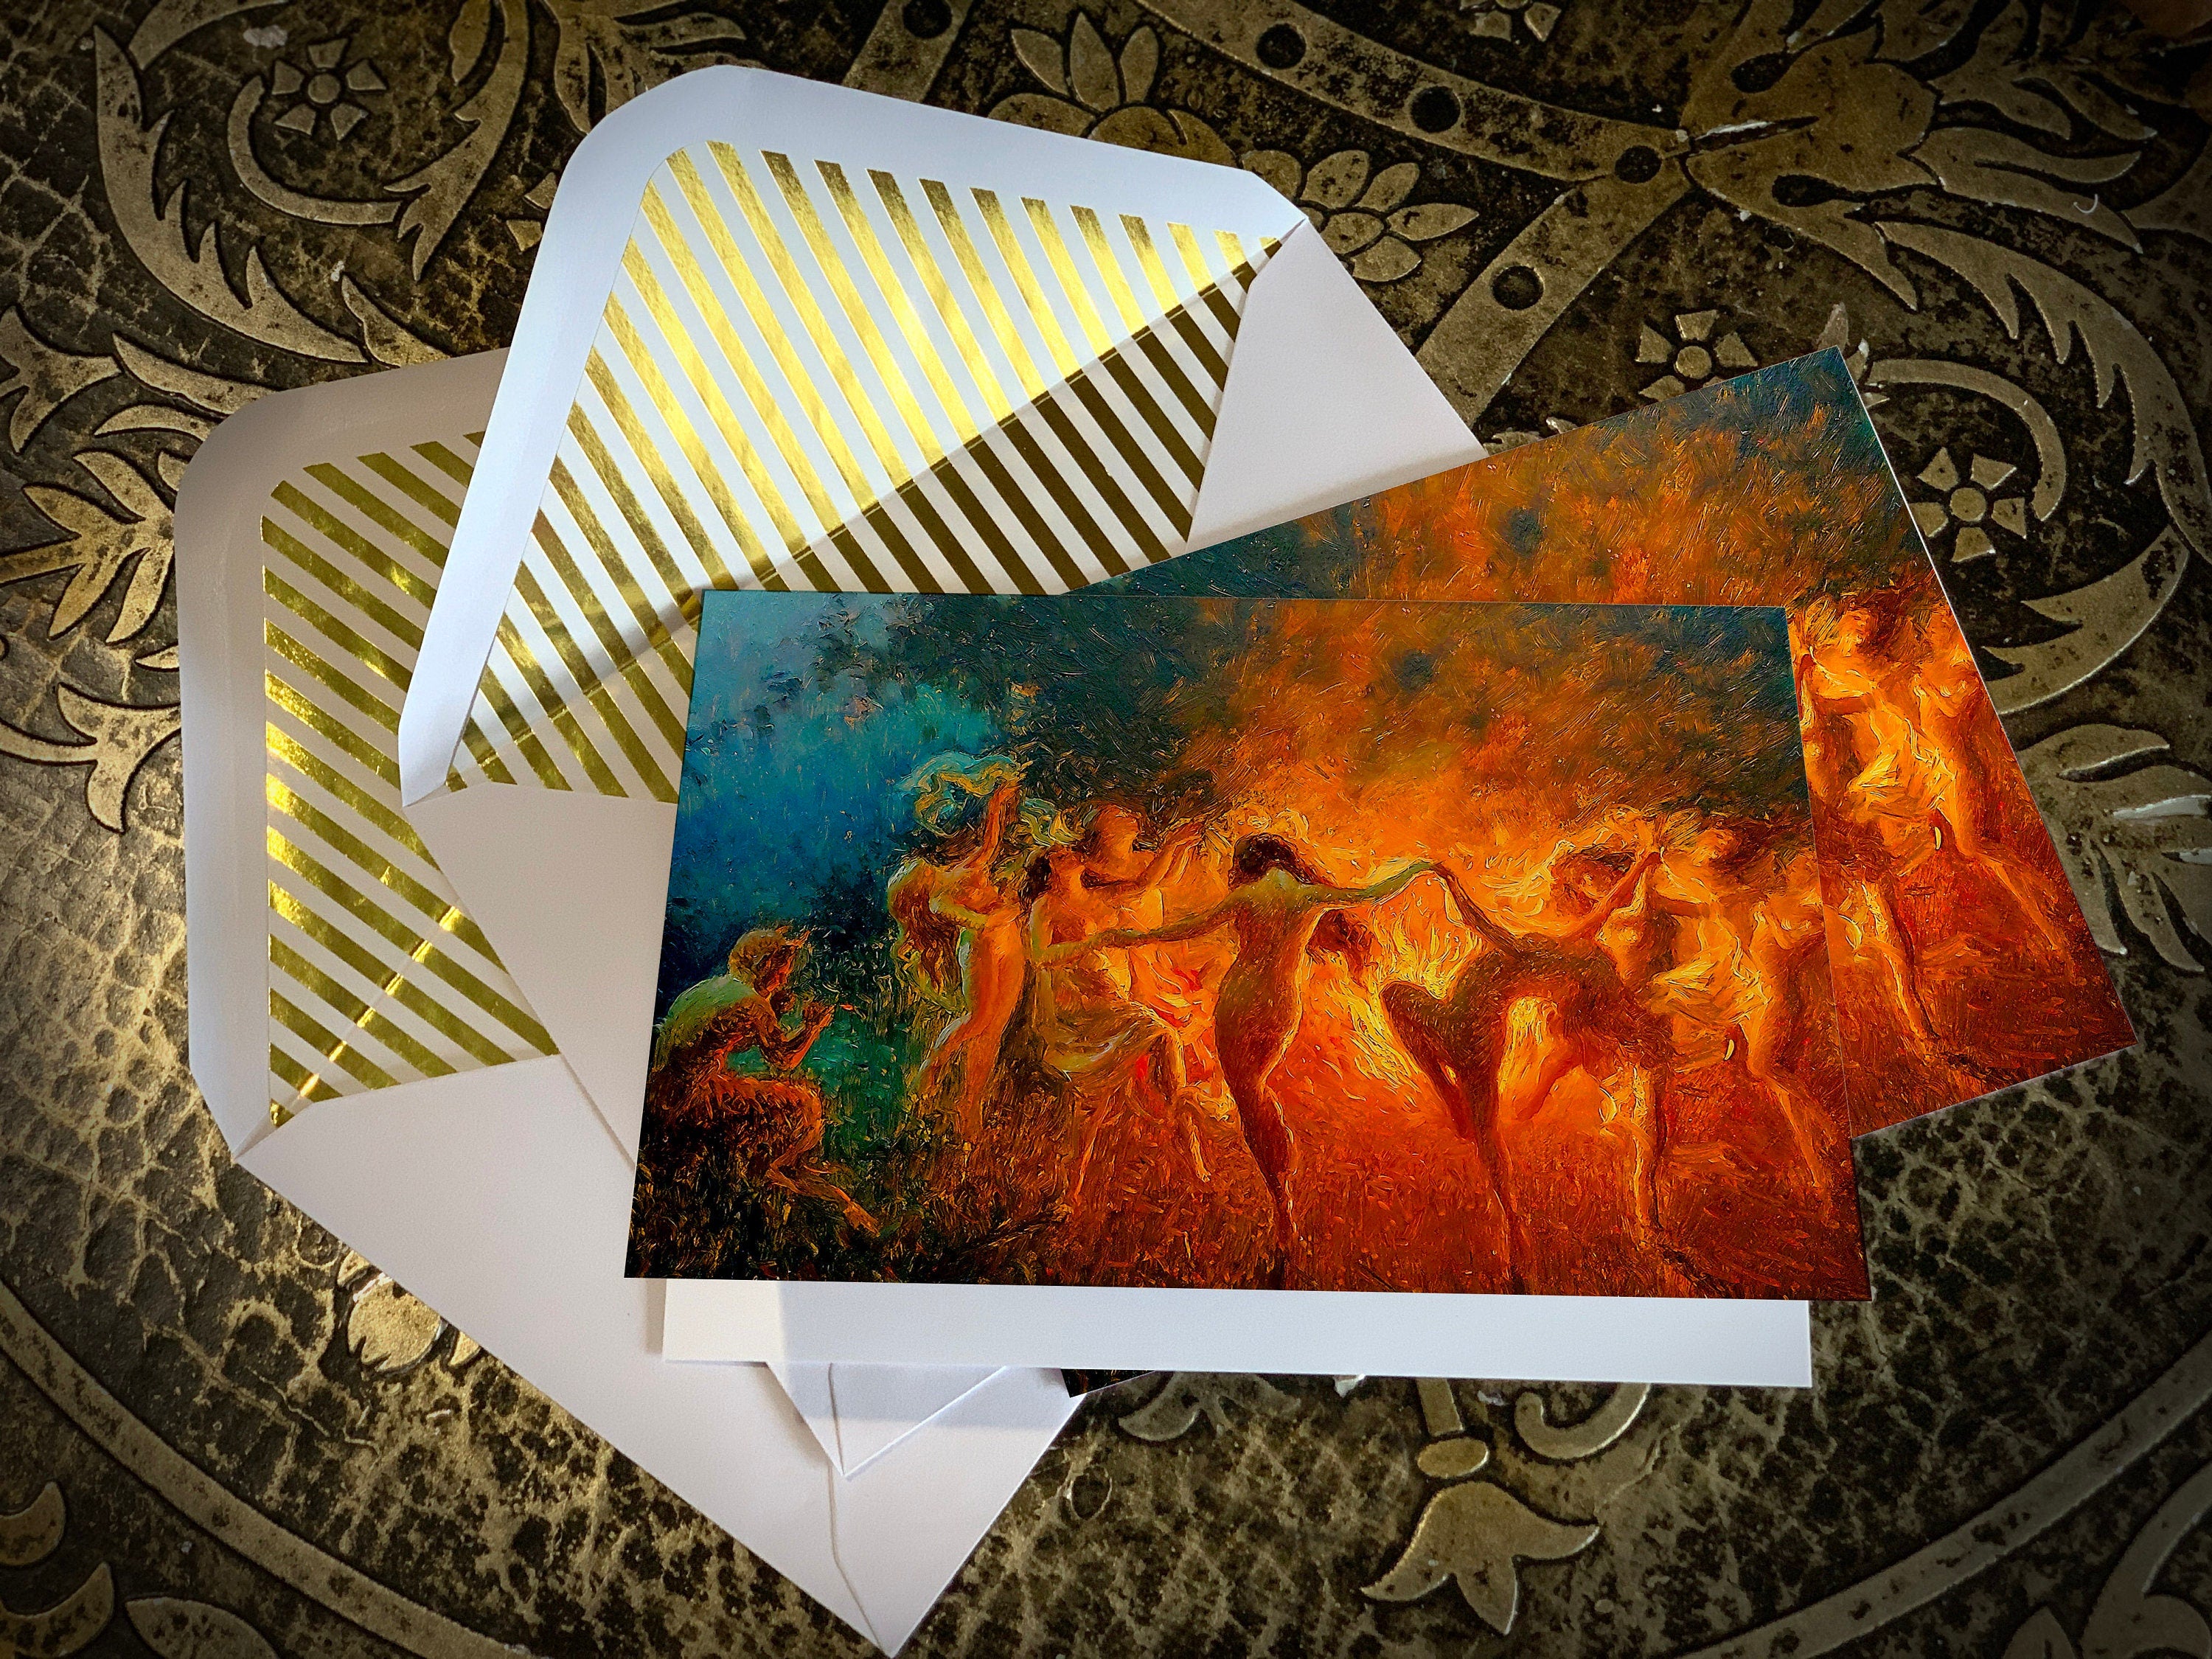 Nude Nymphs Dancing to Pans Flute Around the Fire by Joseph Tomanek, Greeting Card with Elegant Striped Gold Foil Envelope, 1 Card/Envelope